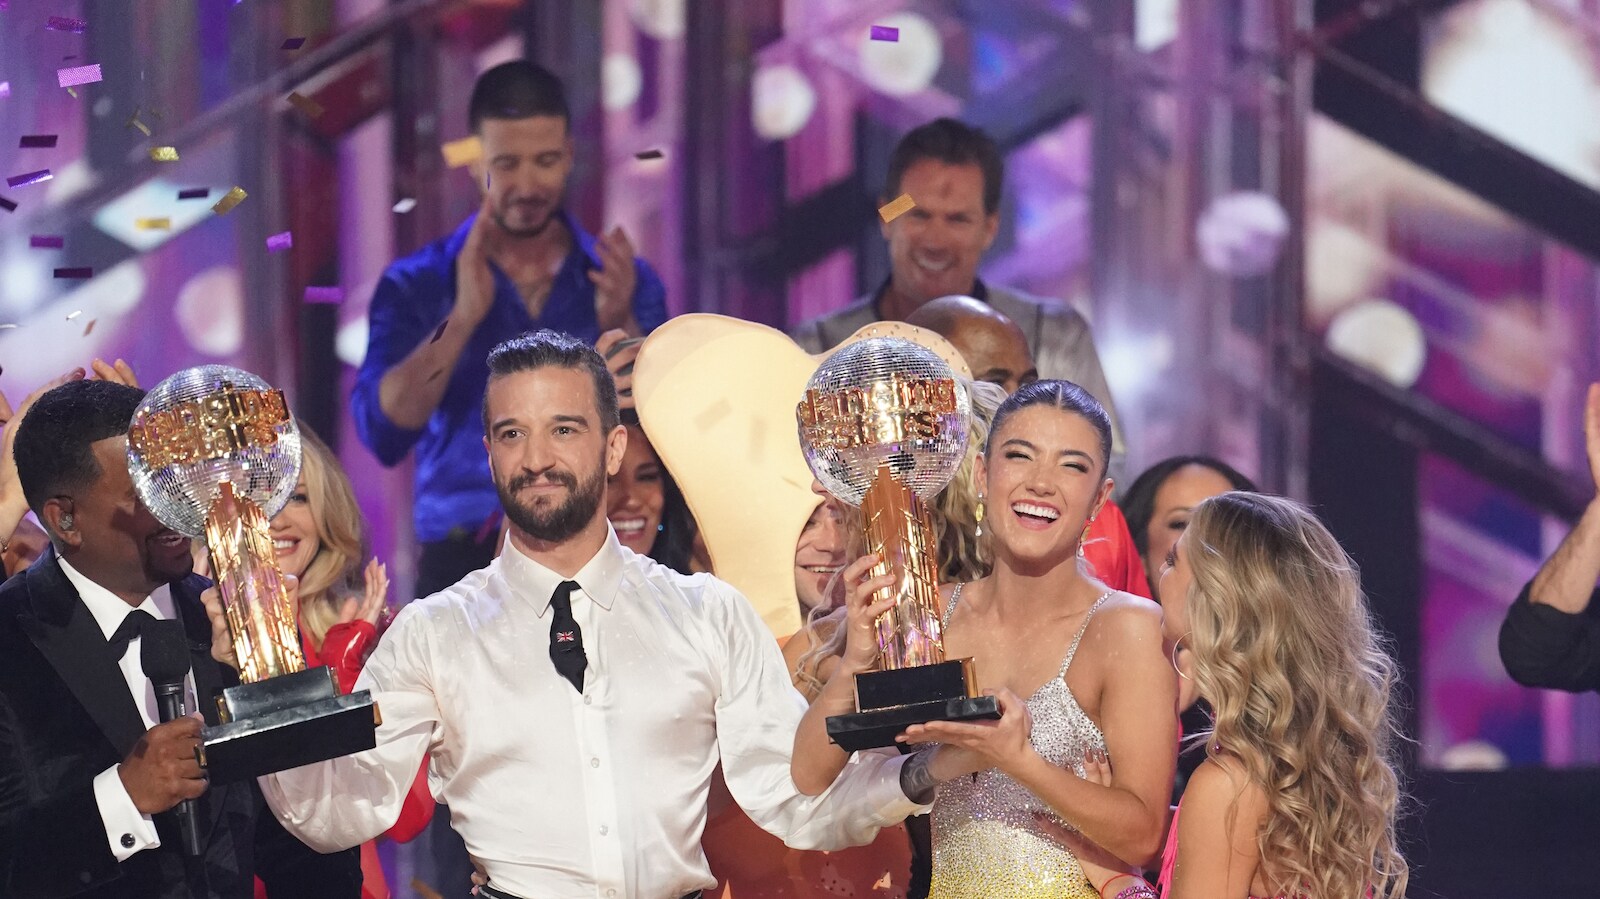 DANCING WITH THE STARS - “Finale” – The four finalists perform their final two routines in hopes of winning the mirrorball trophy. Each couple will perform a redemption dance and an unforgettable freestyle routine. A new episode of “Dancing with the Stars” will stream live MONDAY, NOV. 21 (8:00pm ET / 5:00pm PT), on Disney+. (ABC/Eric McCandless) MARK BALLAS, CHARLI D’AMELIO